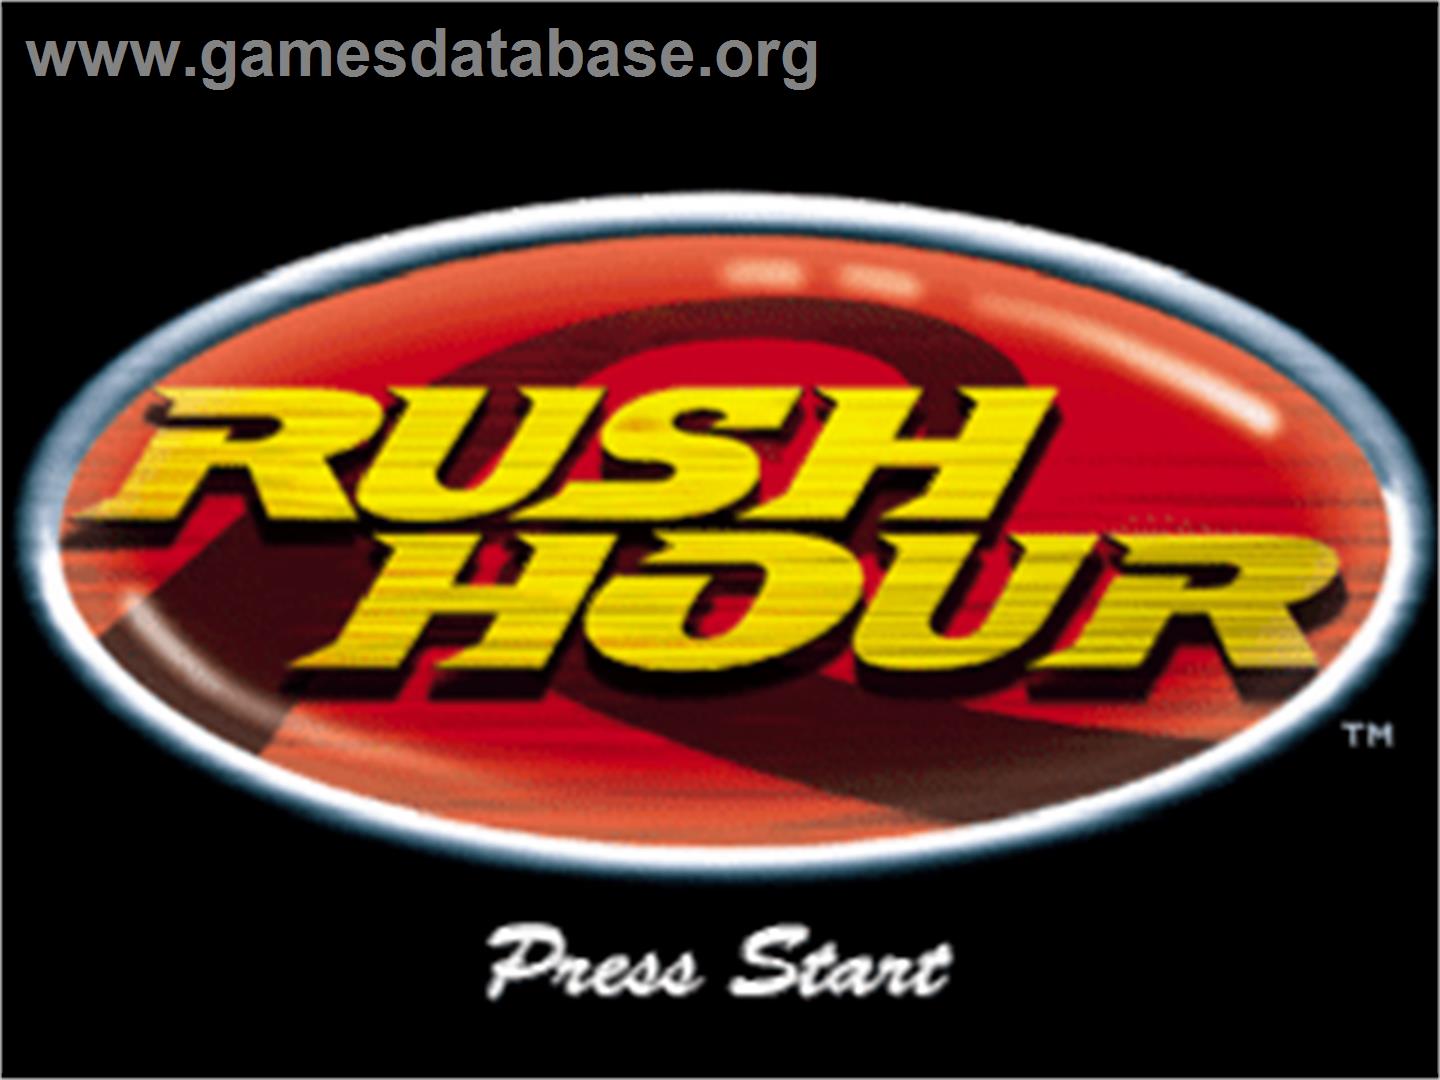 Rush Hour - Sony Playstation - Artwork - Title Screen